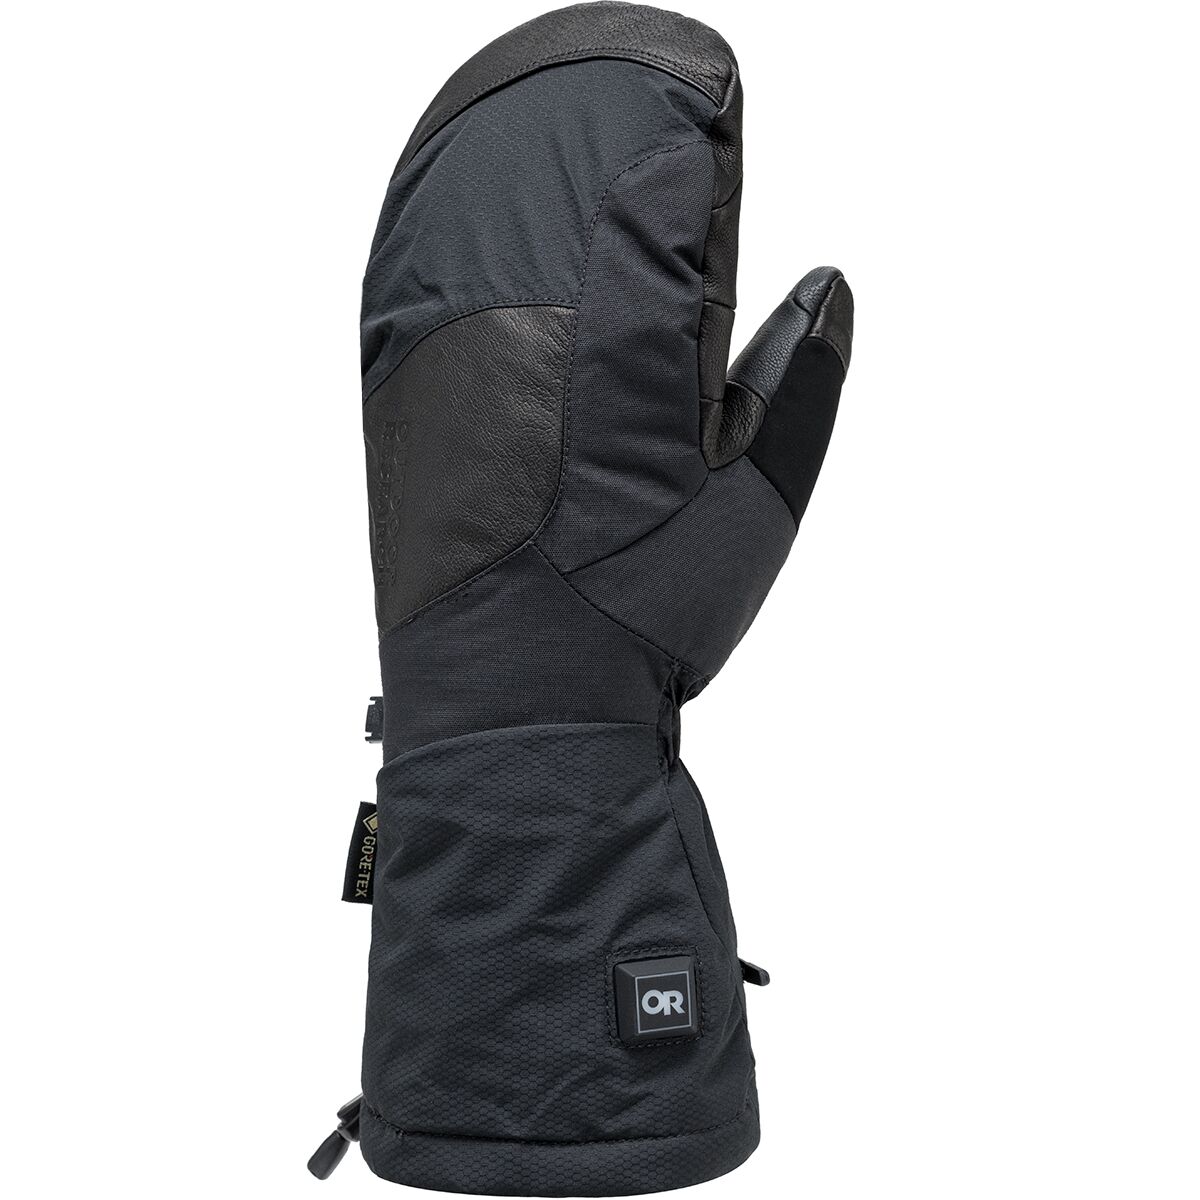 Outdoor Research Prevail Heated GORE-TEX Mitten